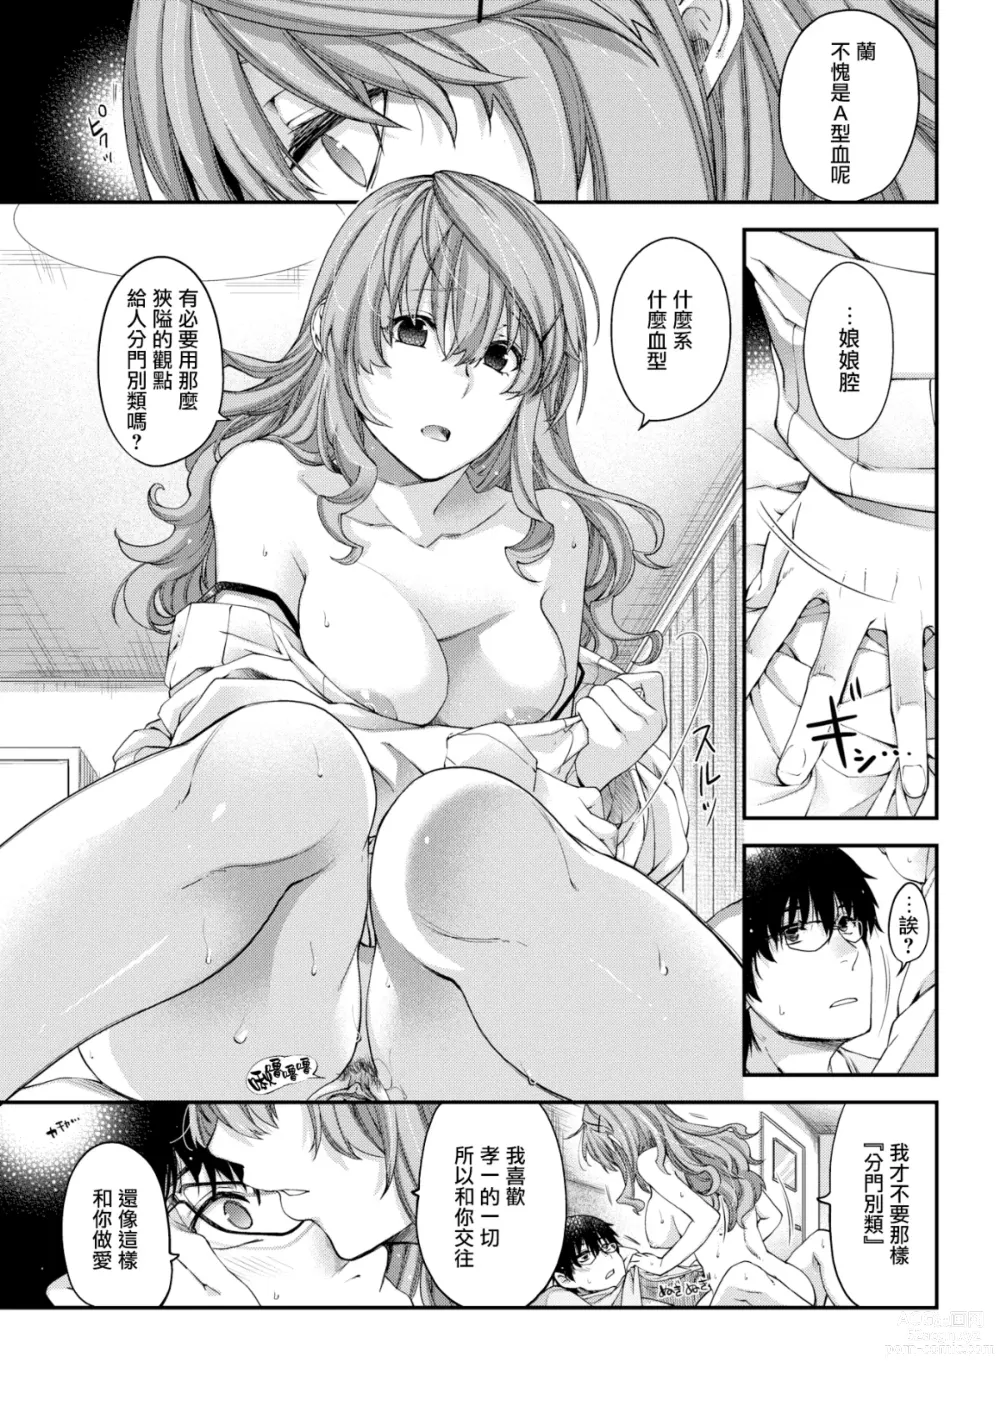 Page 9 of manga Discussion (decensored)